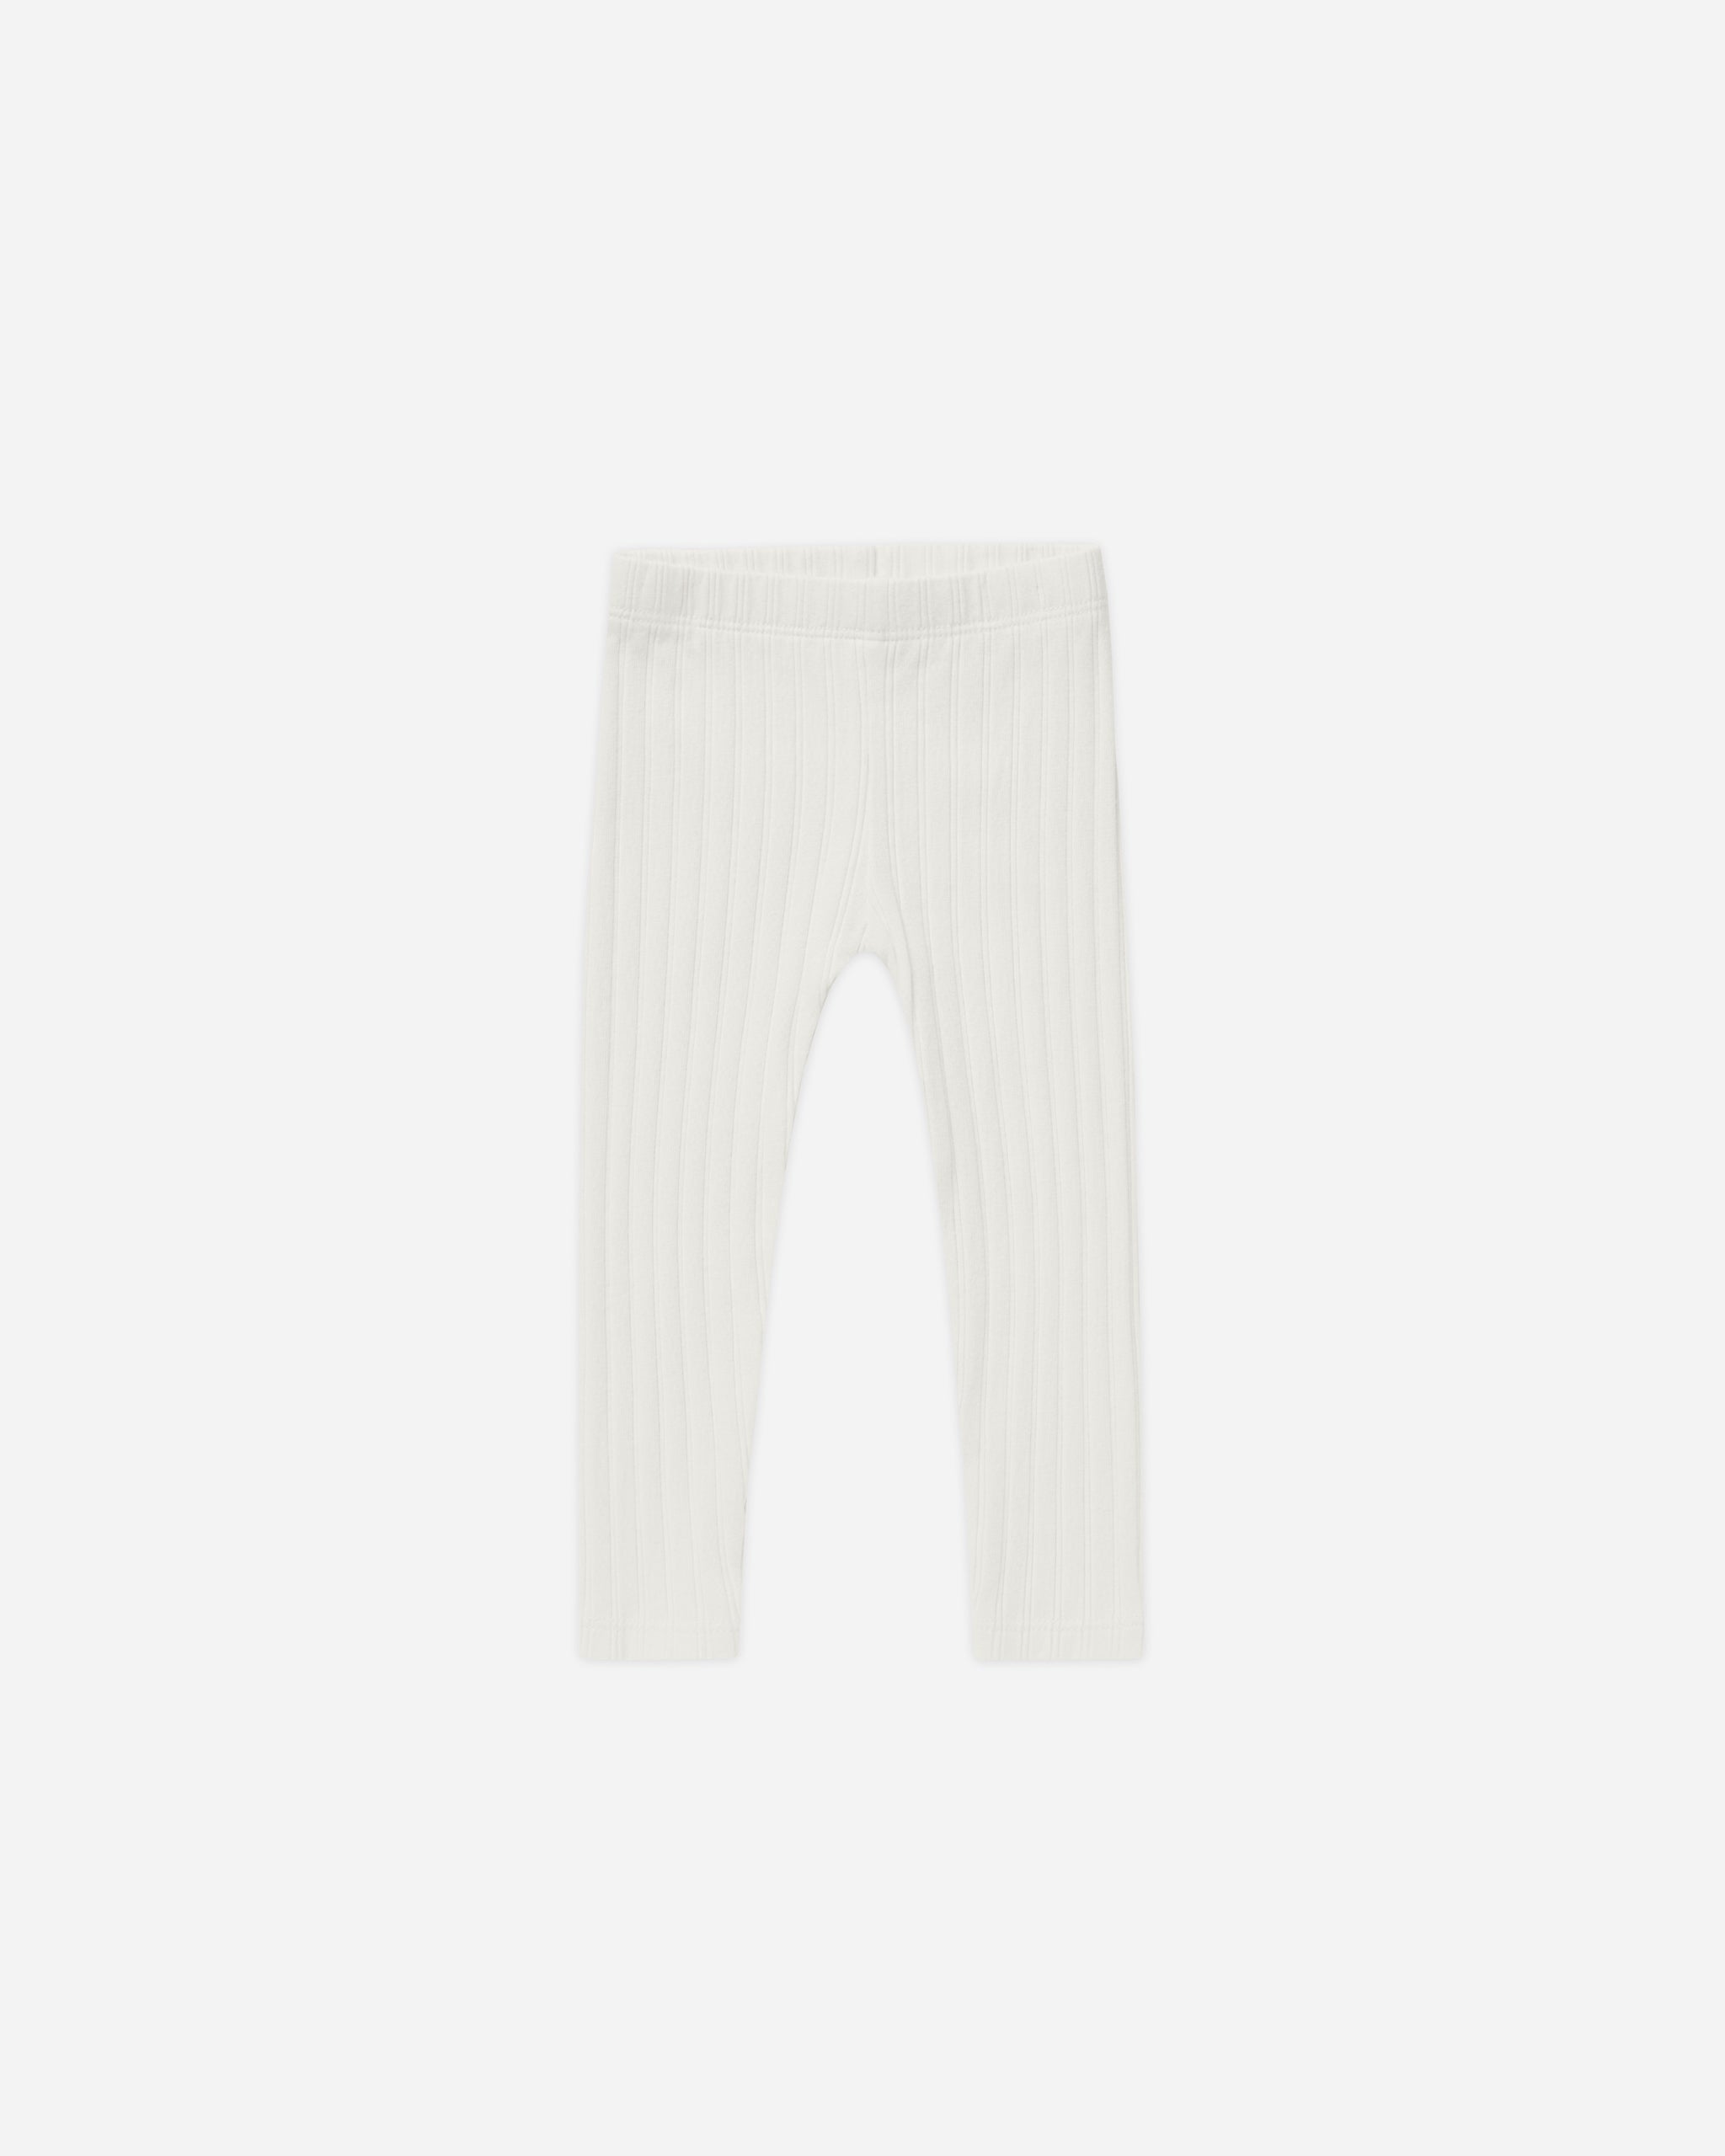 Ribbed Legging || Ivory - Rylee + Cru | Kids Clothes | Trendy Baby Clothes | Modern Infant Outfits |